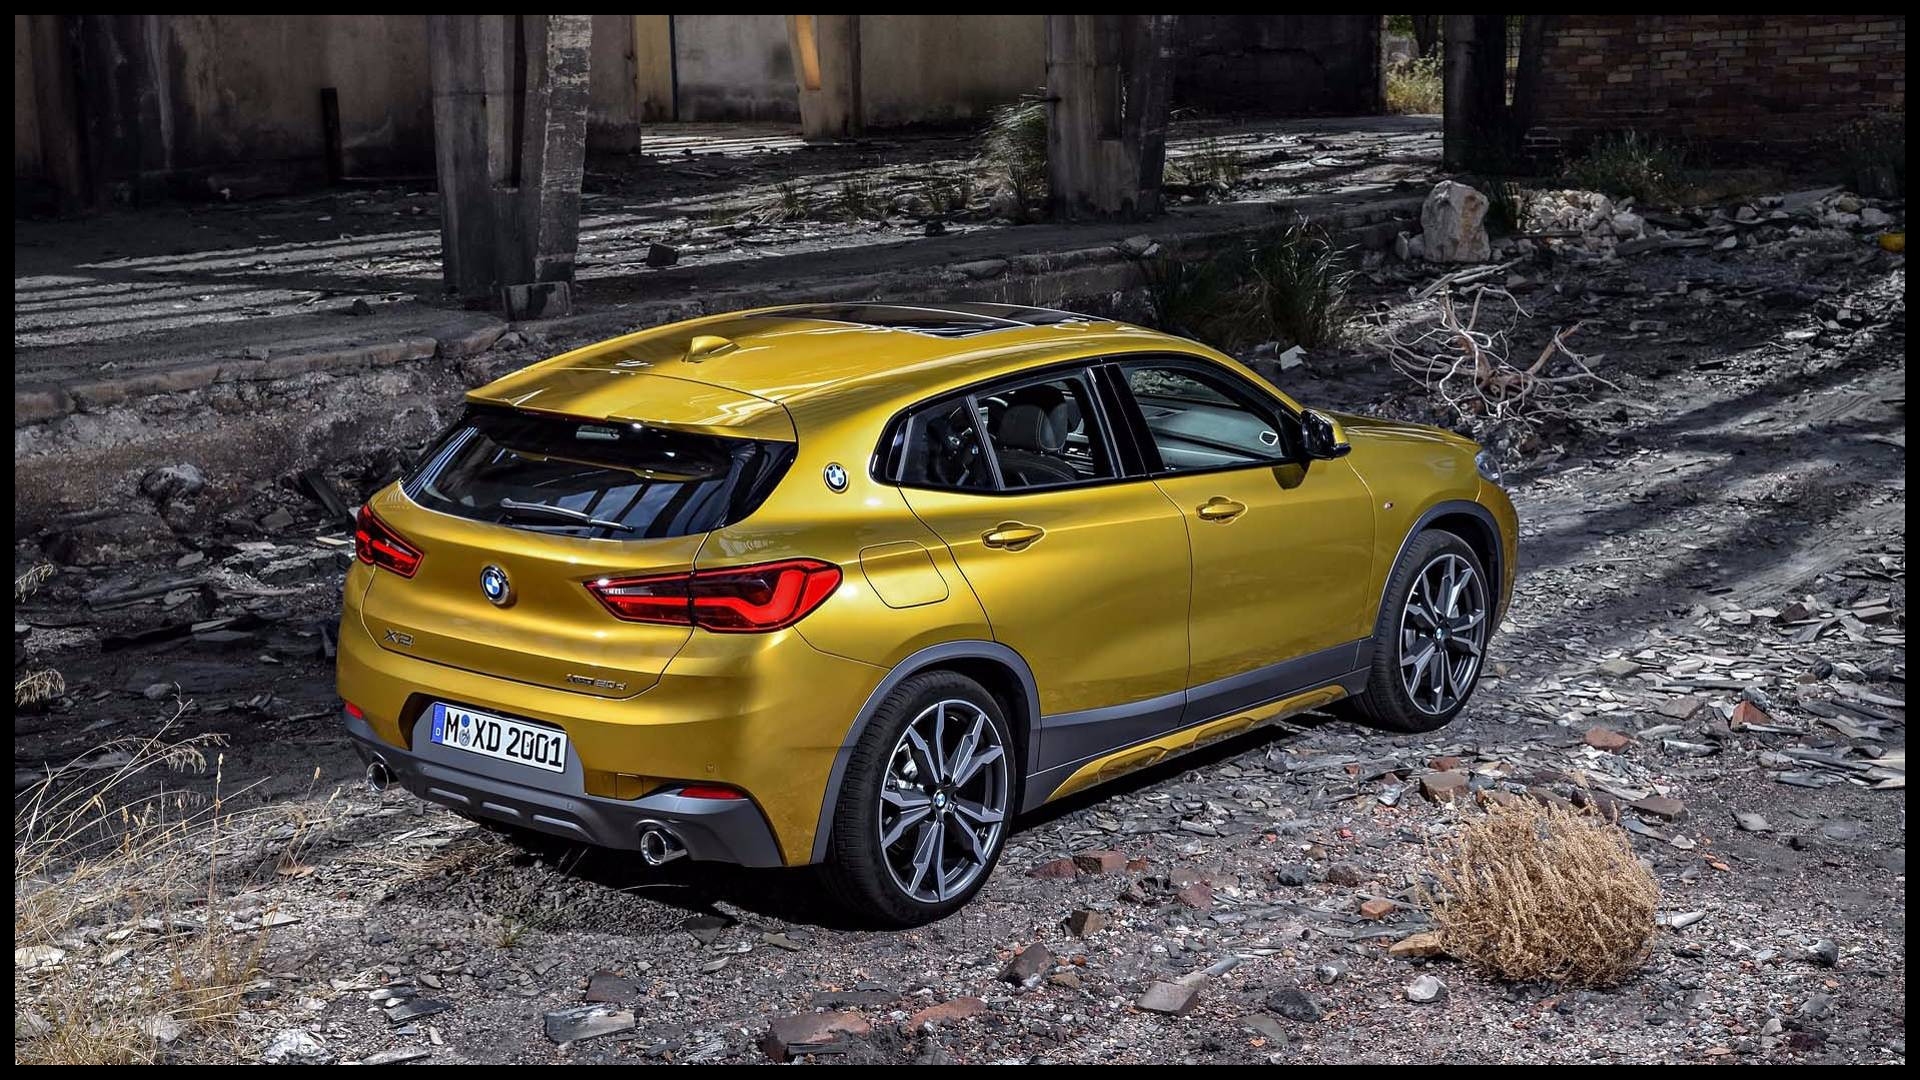 Are Bmw Parts Expensive New Bmw X2 Vs Bmw X1 See the Changes Side by Side